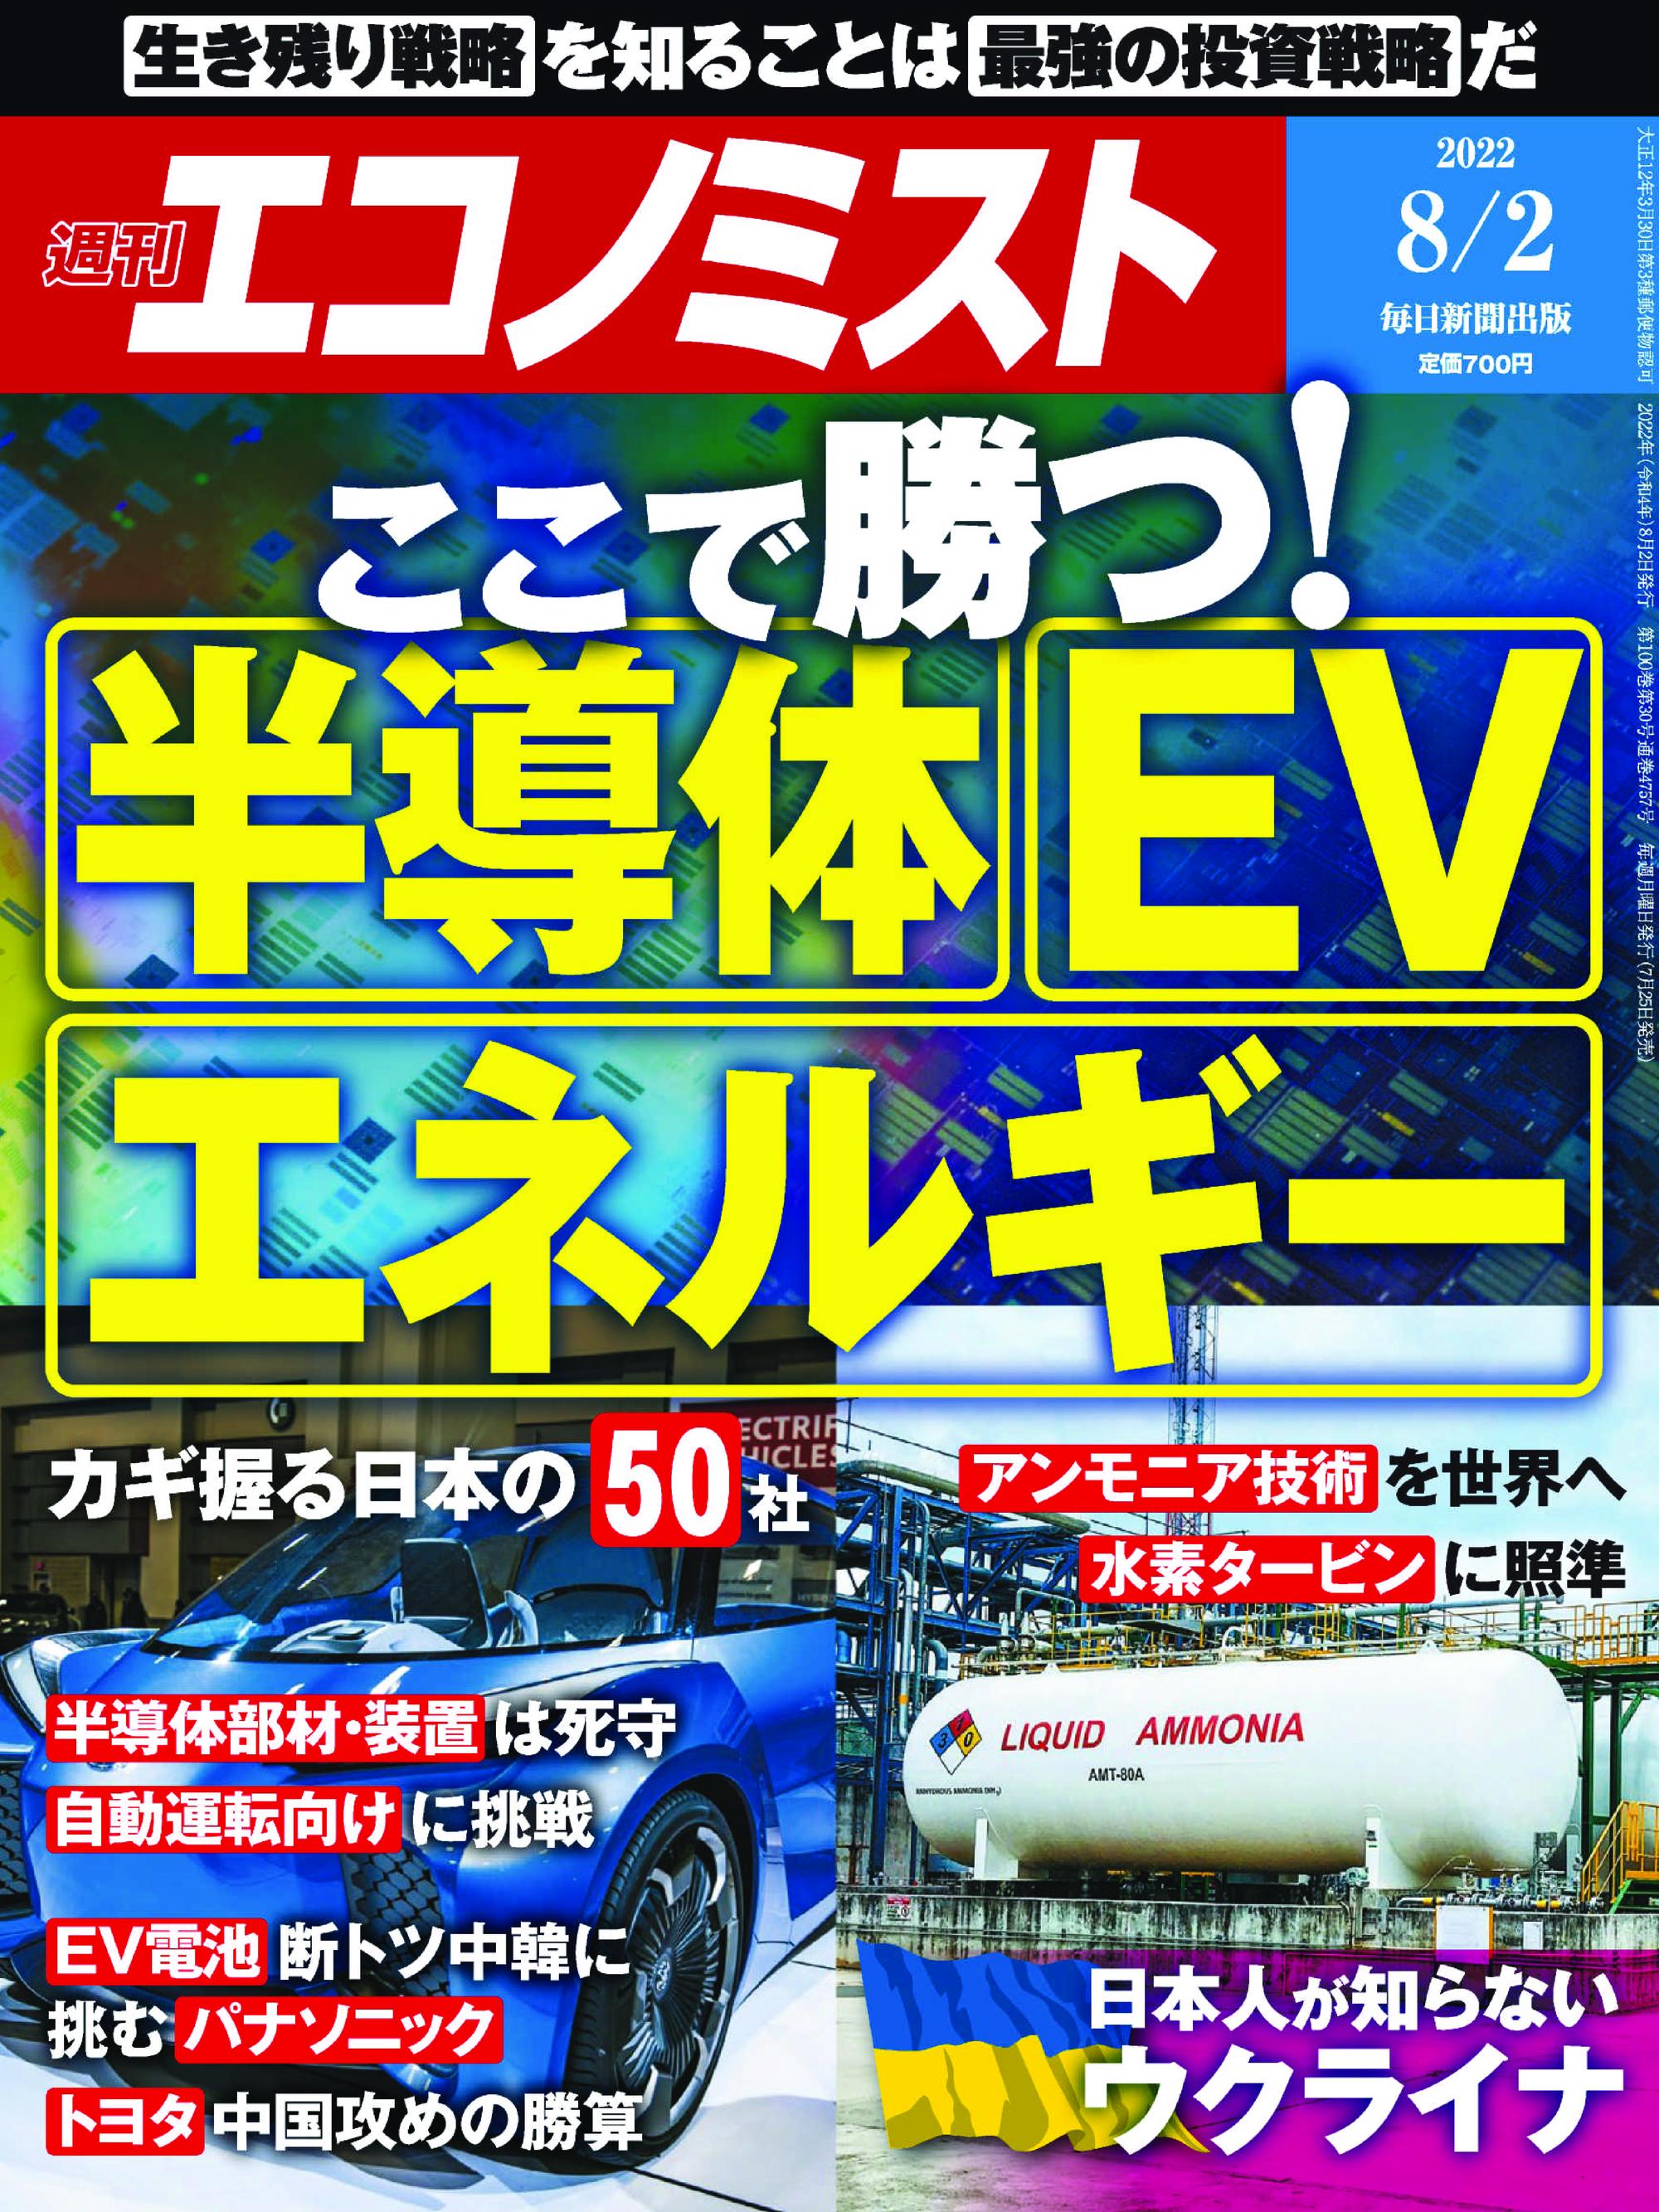 Weekly Economist 週刊エコノミスト – 25 7月 2022